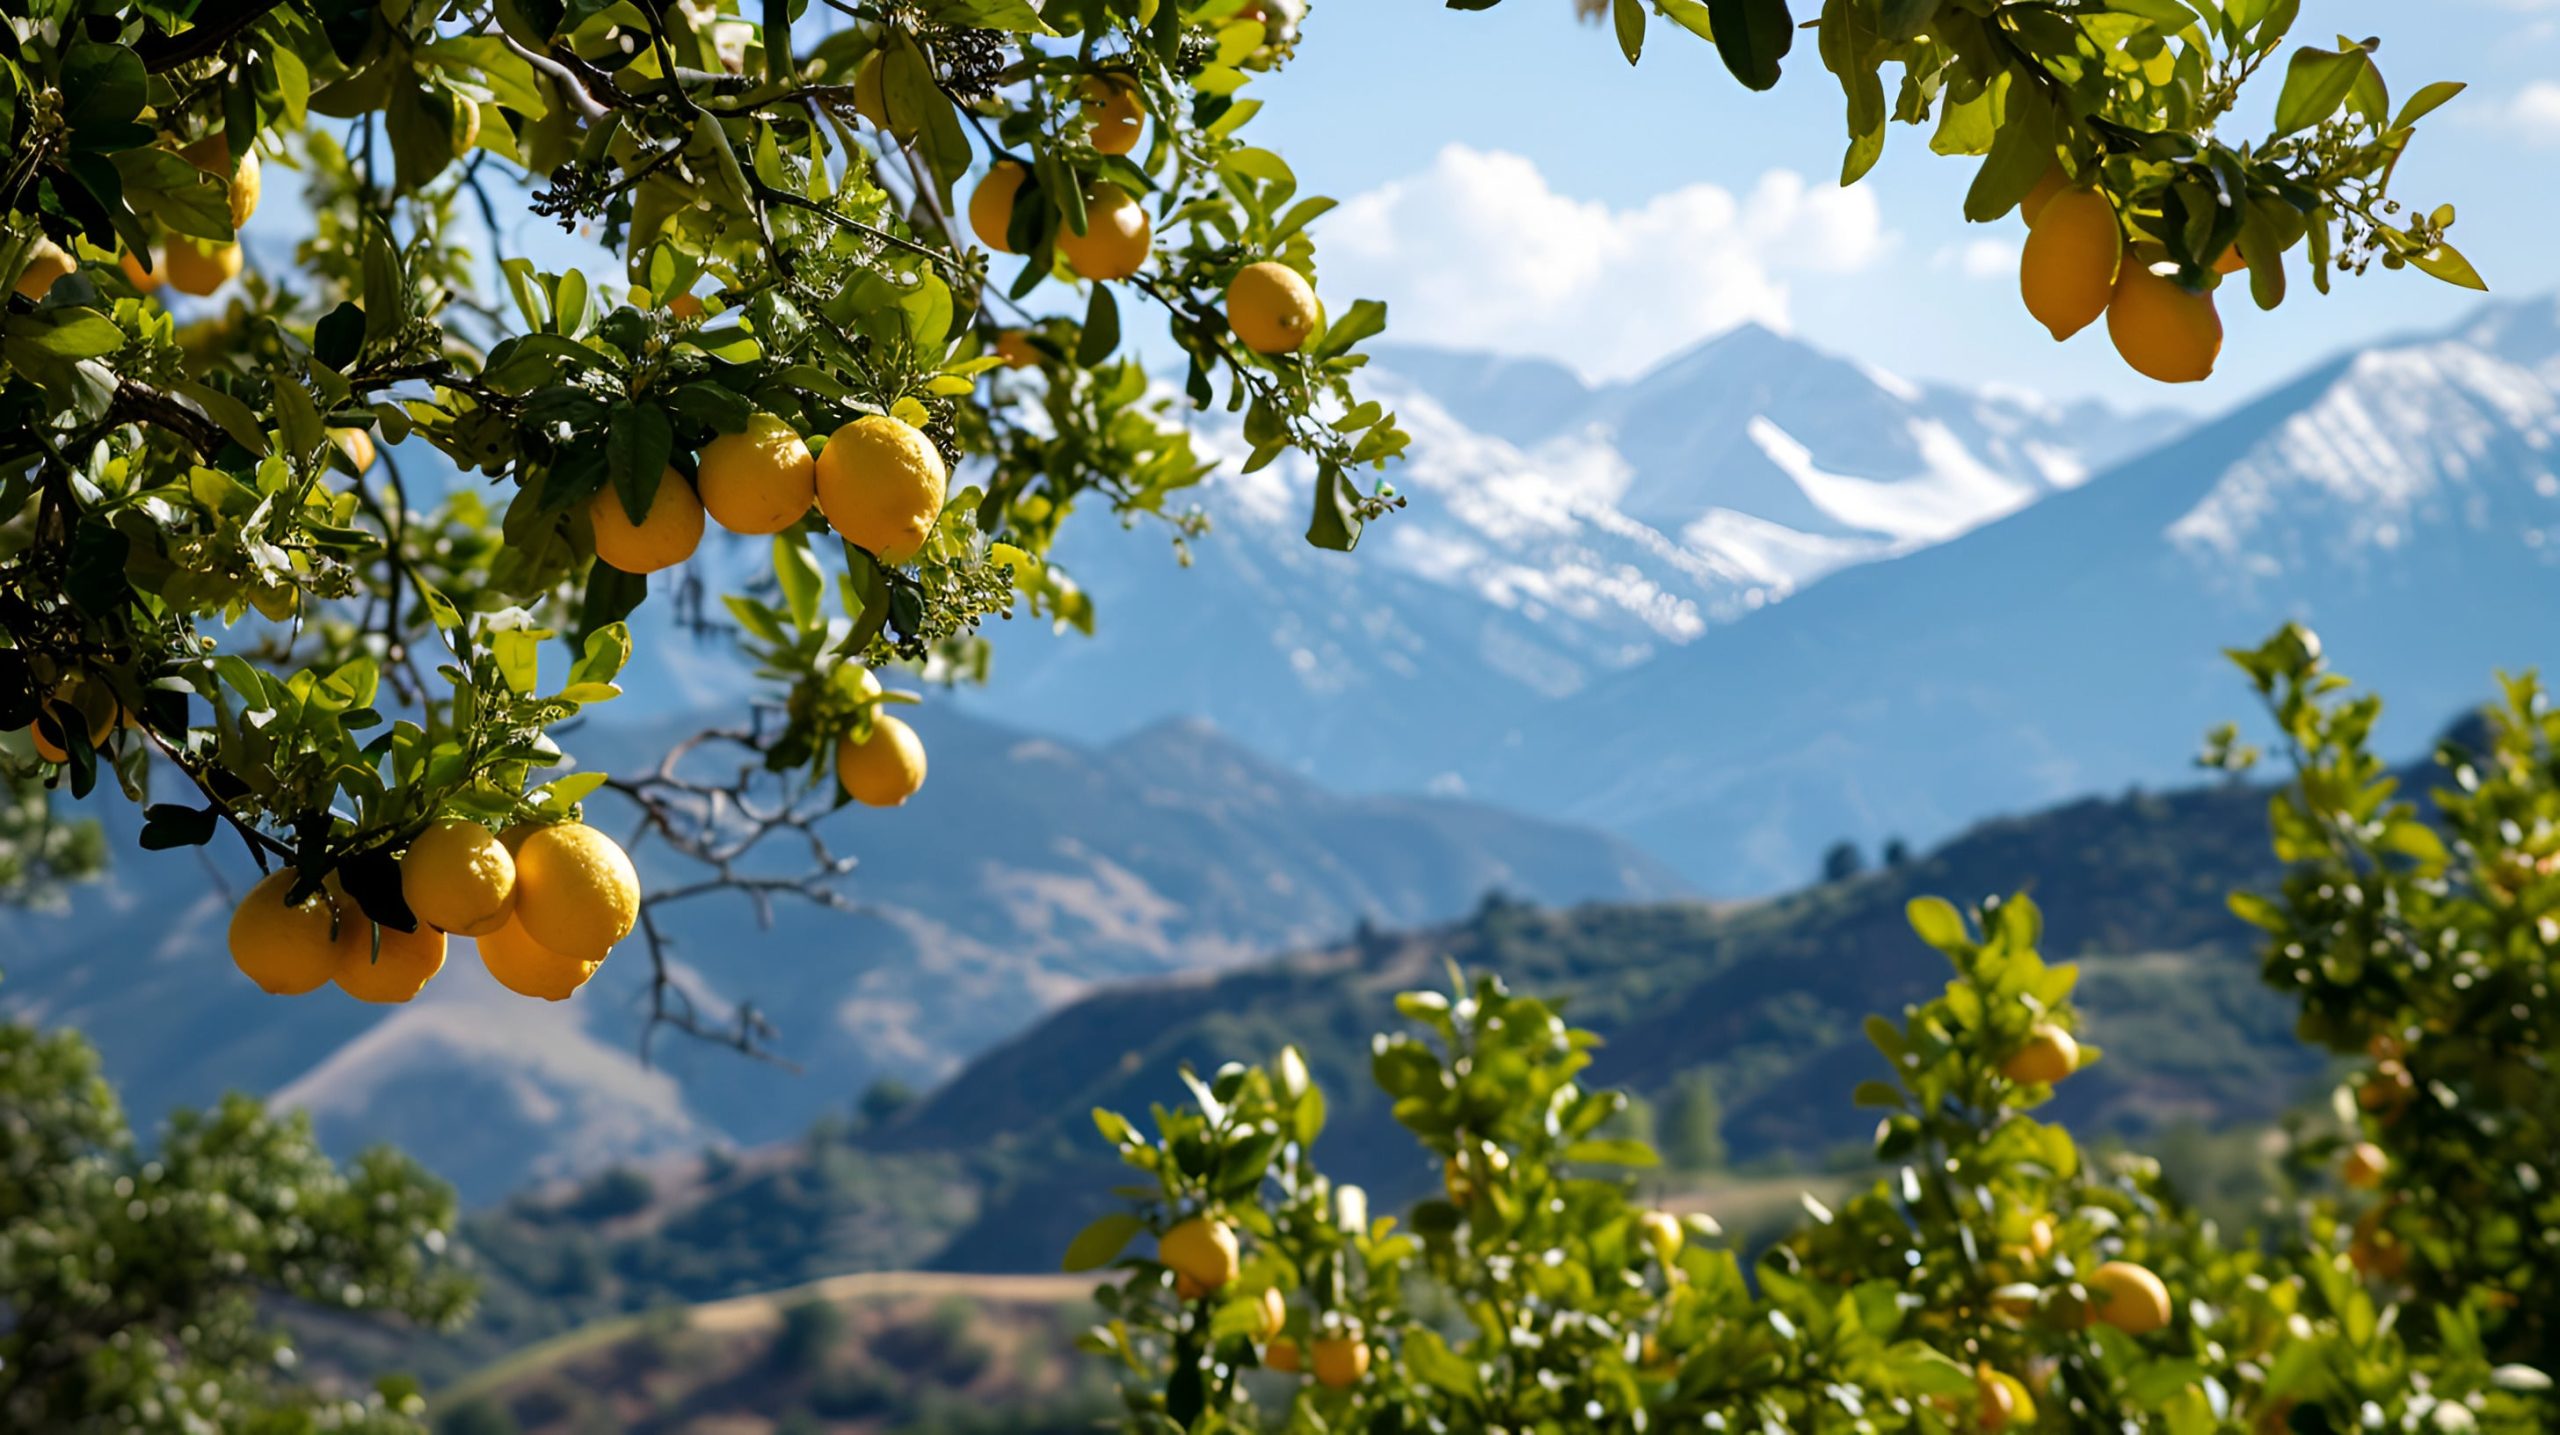 a lemon tree in the foreground with a view of snow-capped colorado mountains behind it